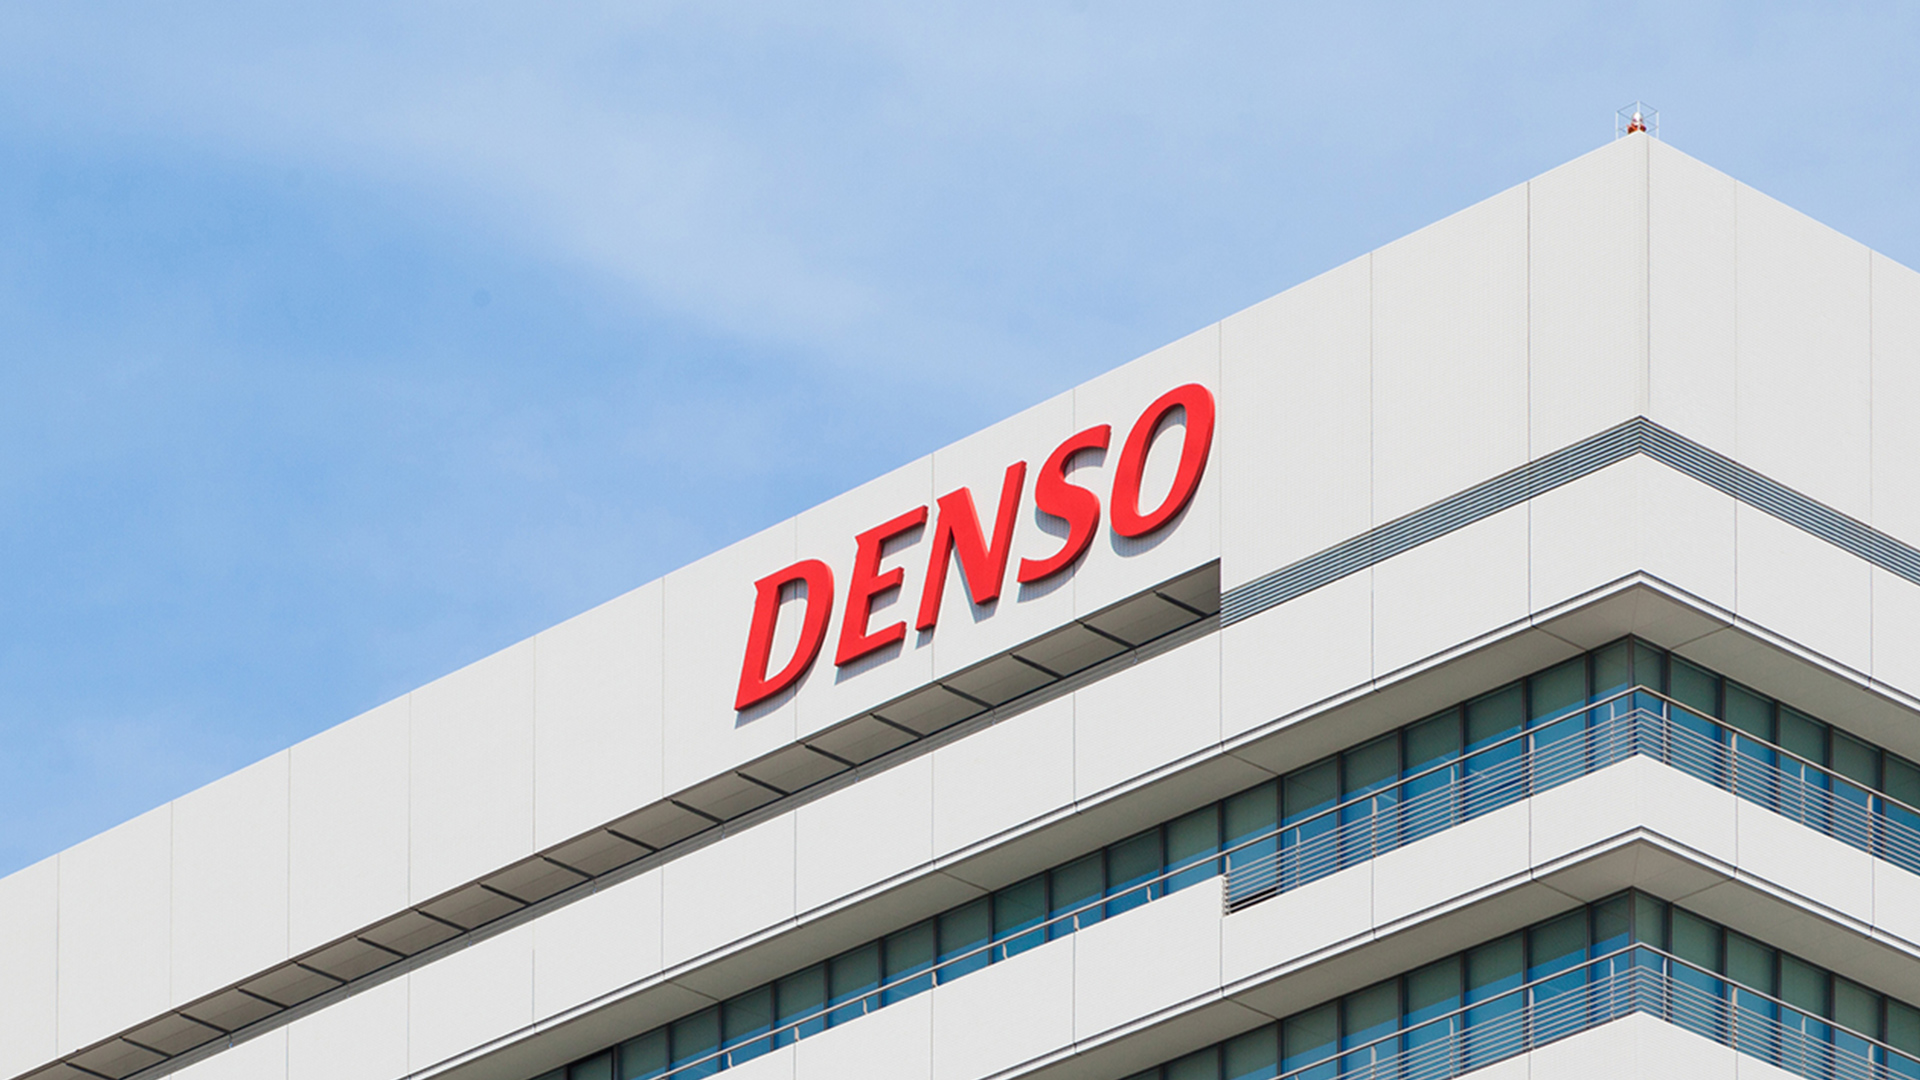 DENSO to invest US$13 million in its Silao plant